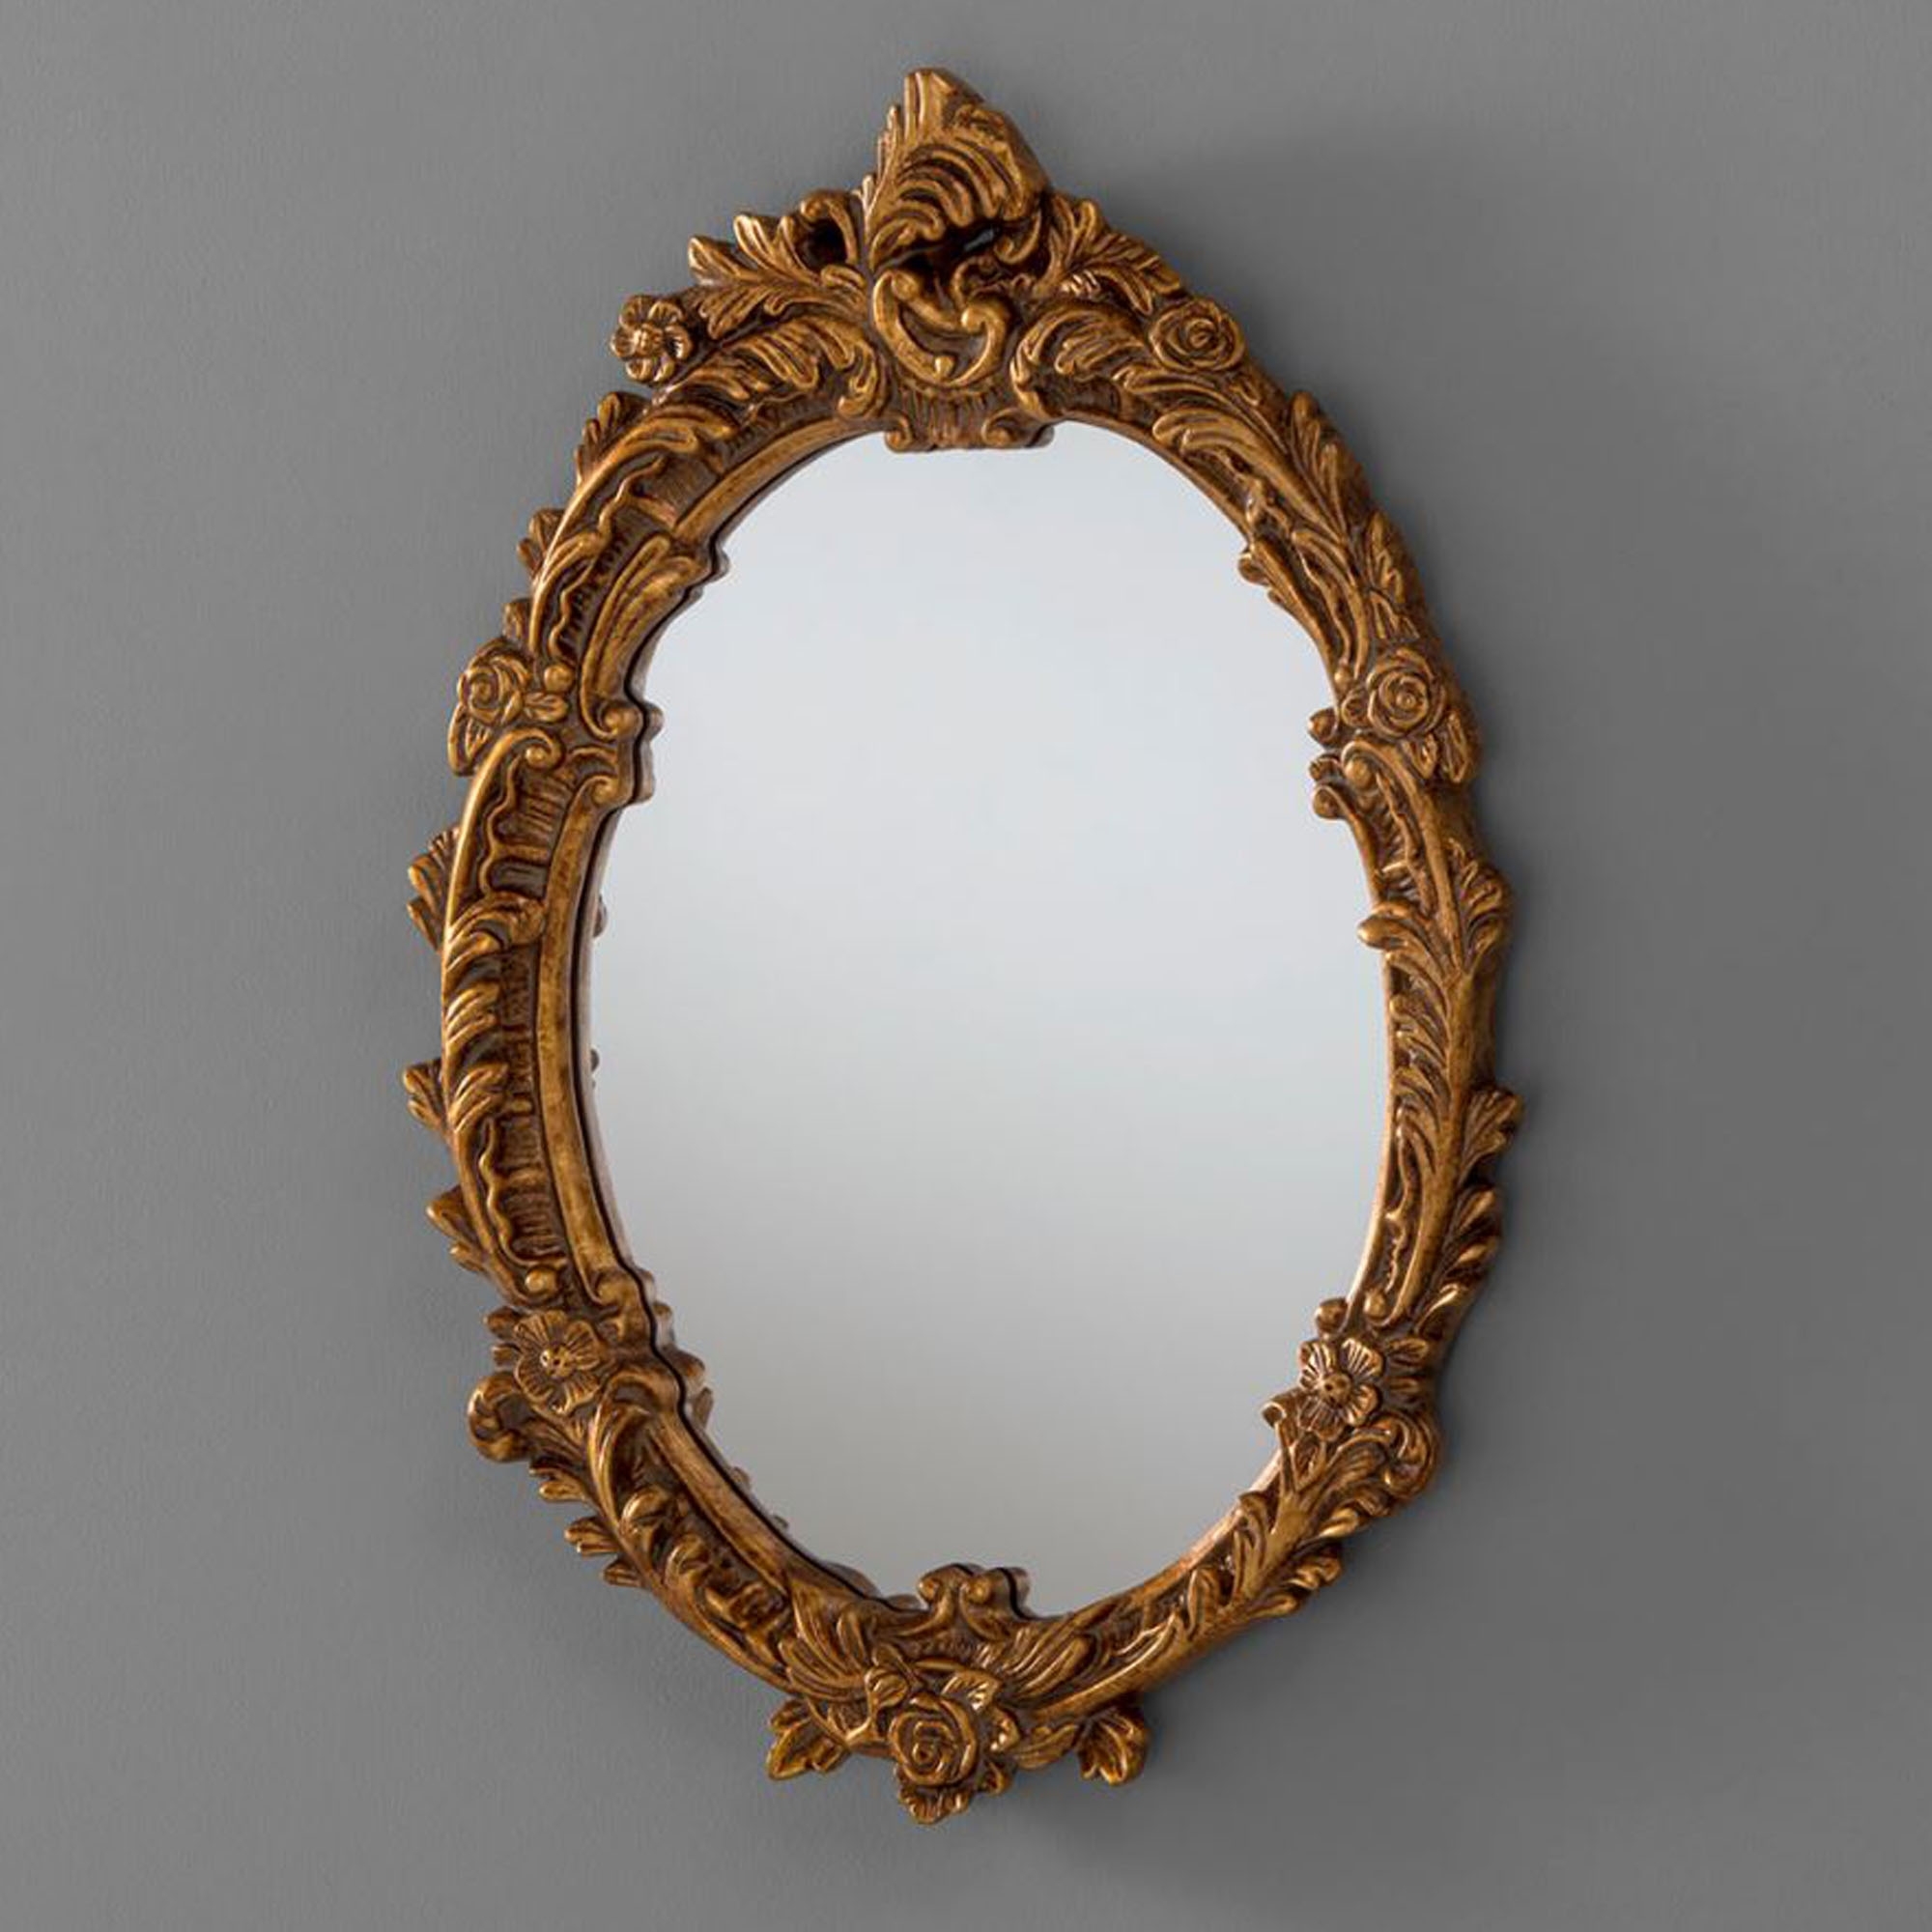 antique-french-style-oval-gold-ornate-wall-mirror-p45412-43345_zoom.jpg